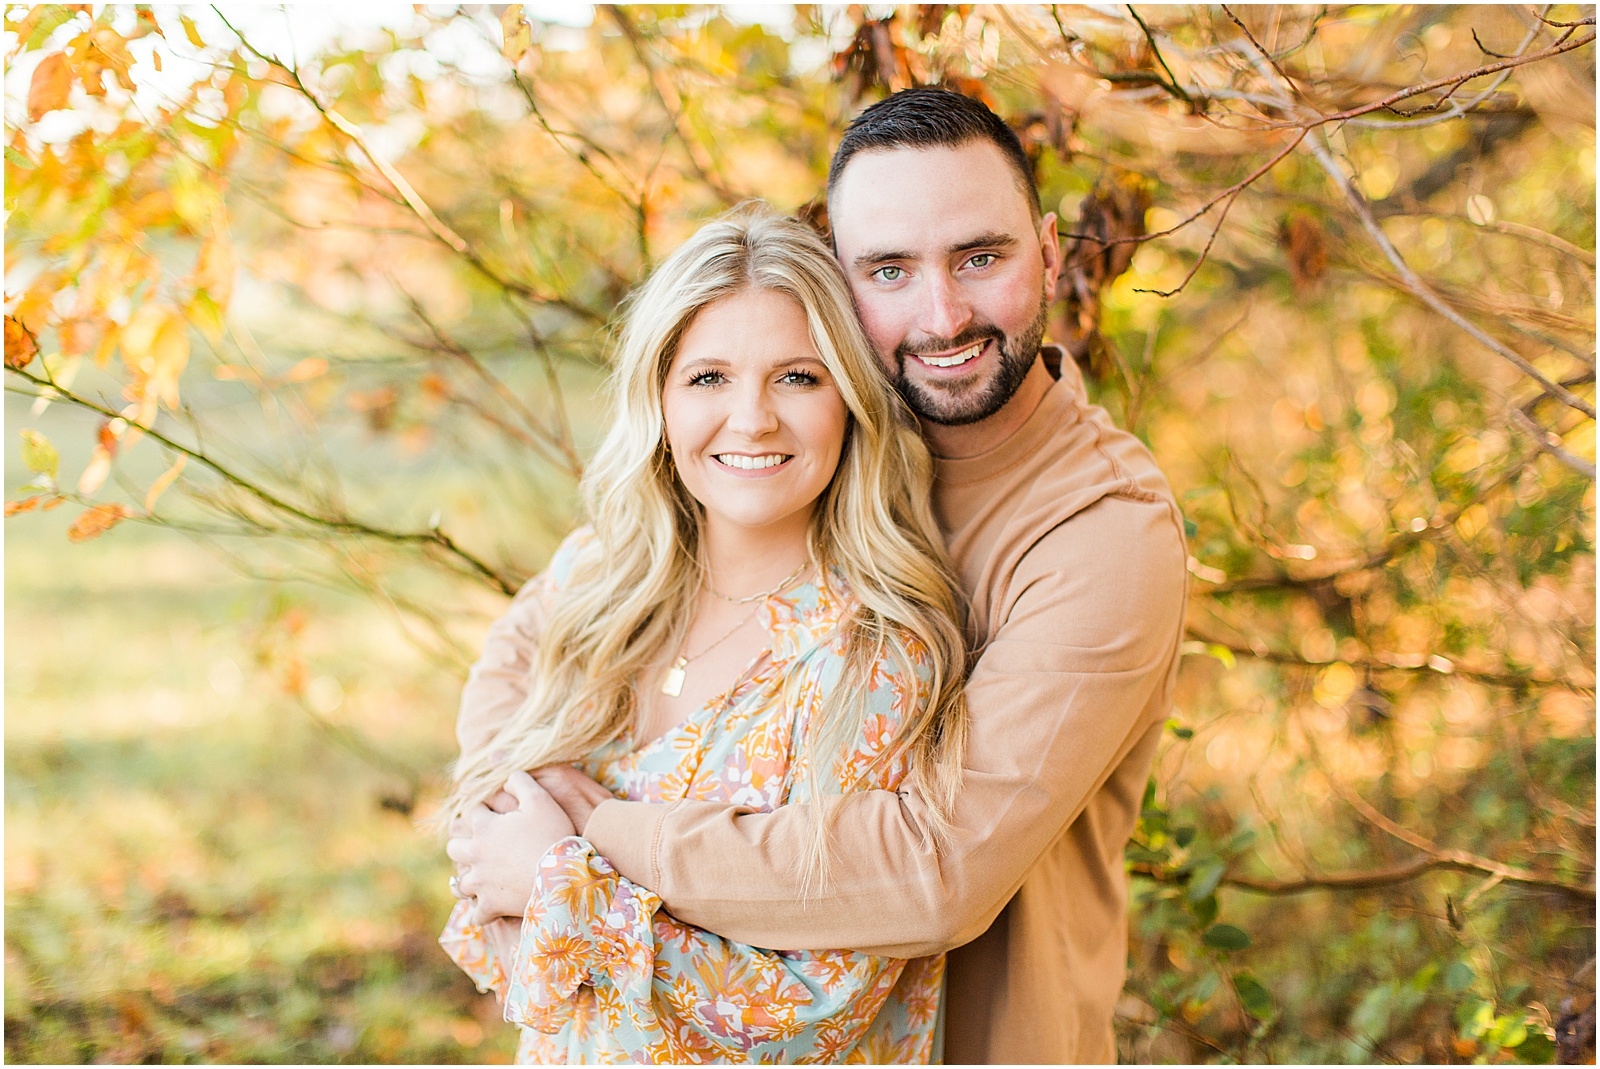 A Southern Indiana Engagement Session | Charleston and Erin | Bret and Brandie Photography010.jpg